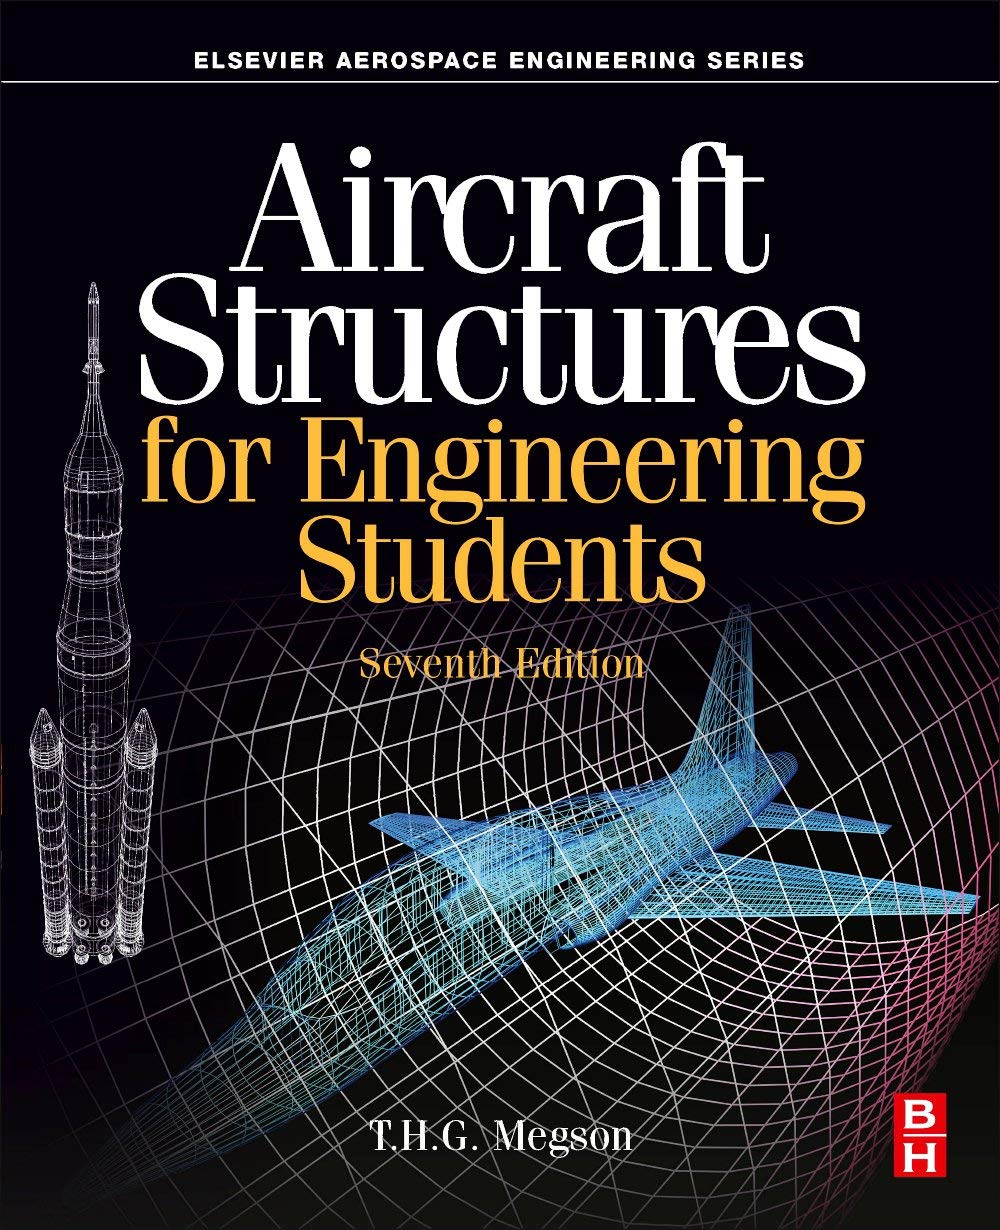 Aircraft Structures for Engineering Students 7th Edition(Aerospace Engineering) by T.H.G. Megson 